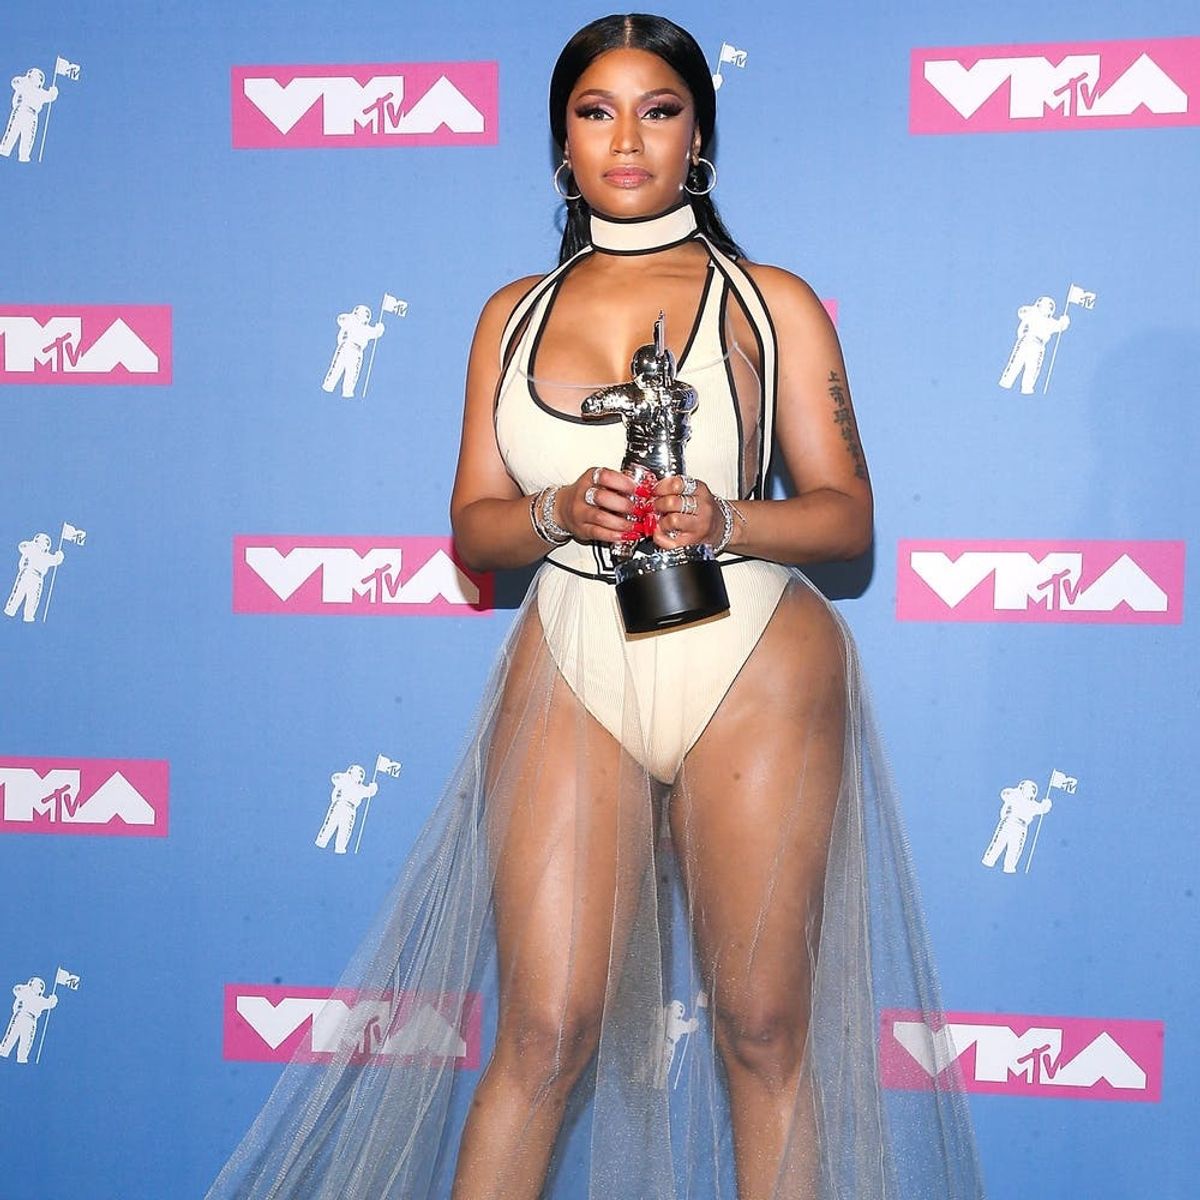 The Wildest Celeb Outfits at the 2018 MTV VMAs